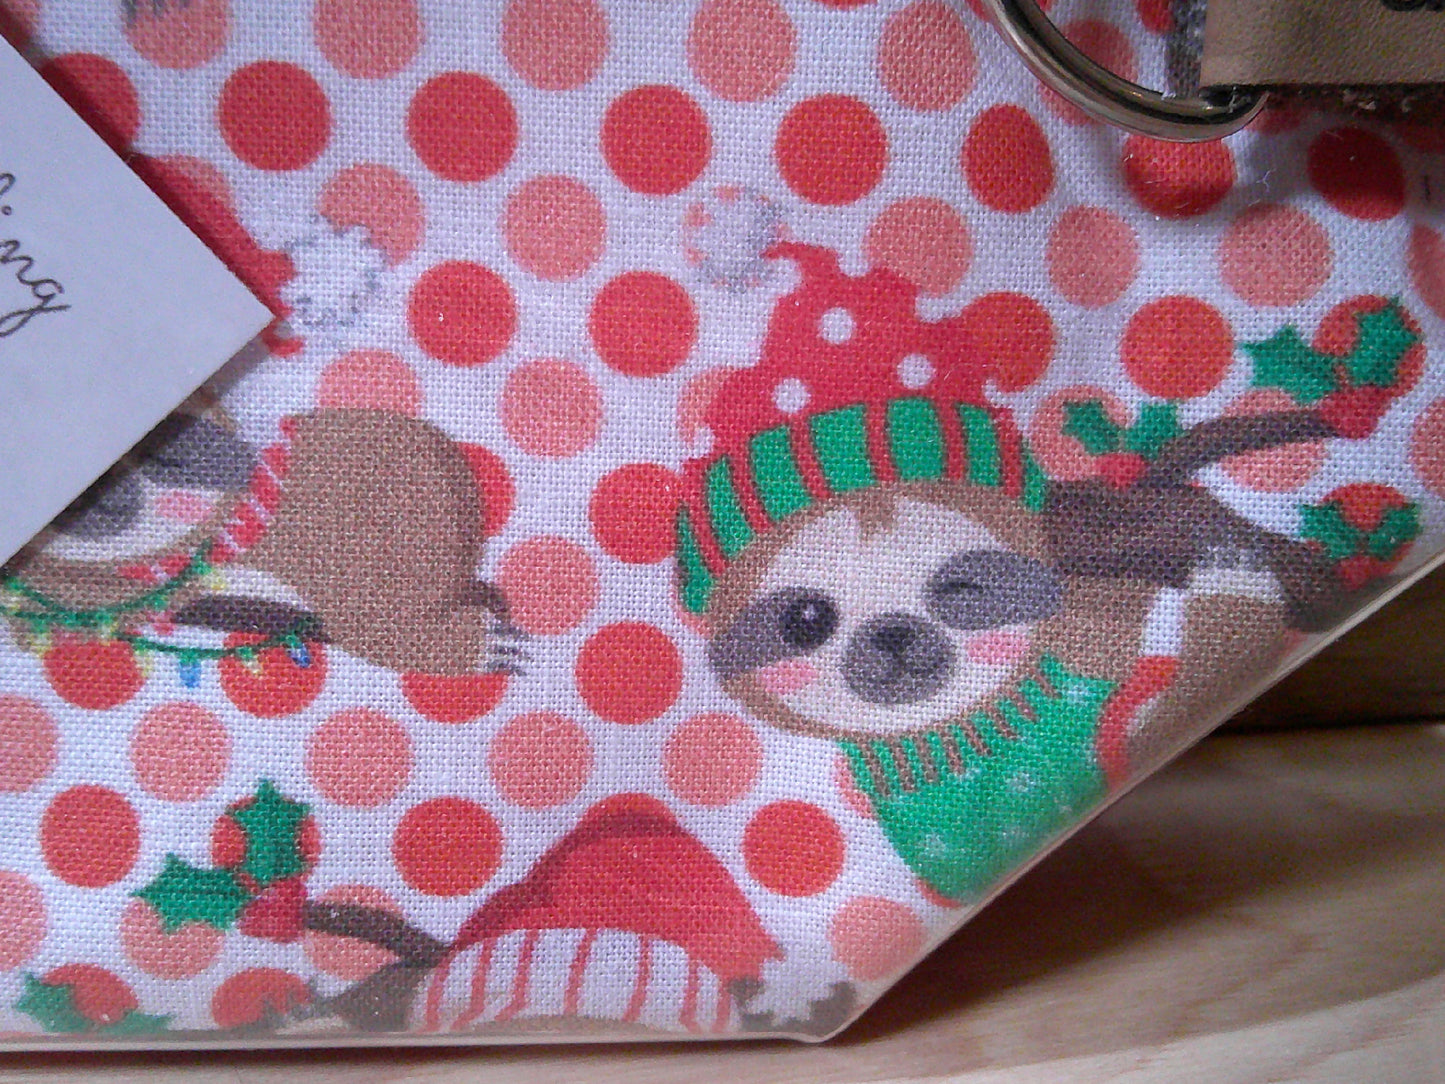 Santa Sloth w/ green & red project bags